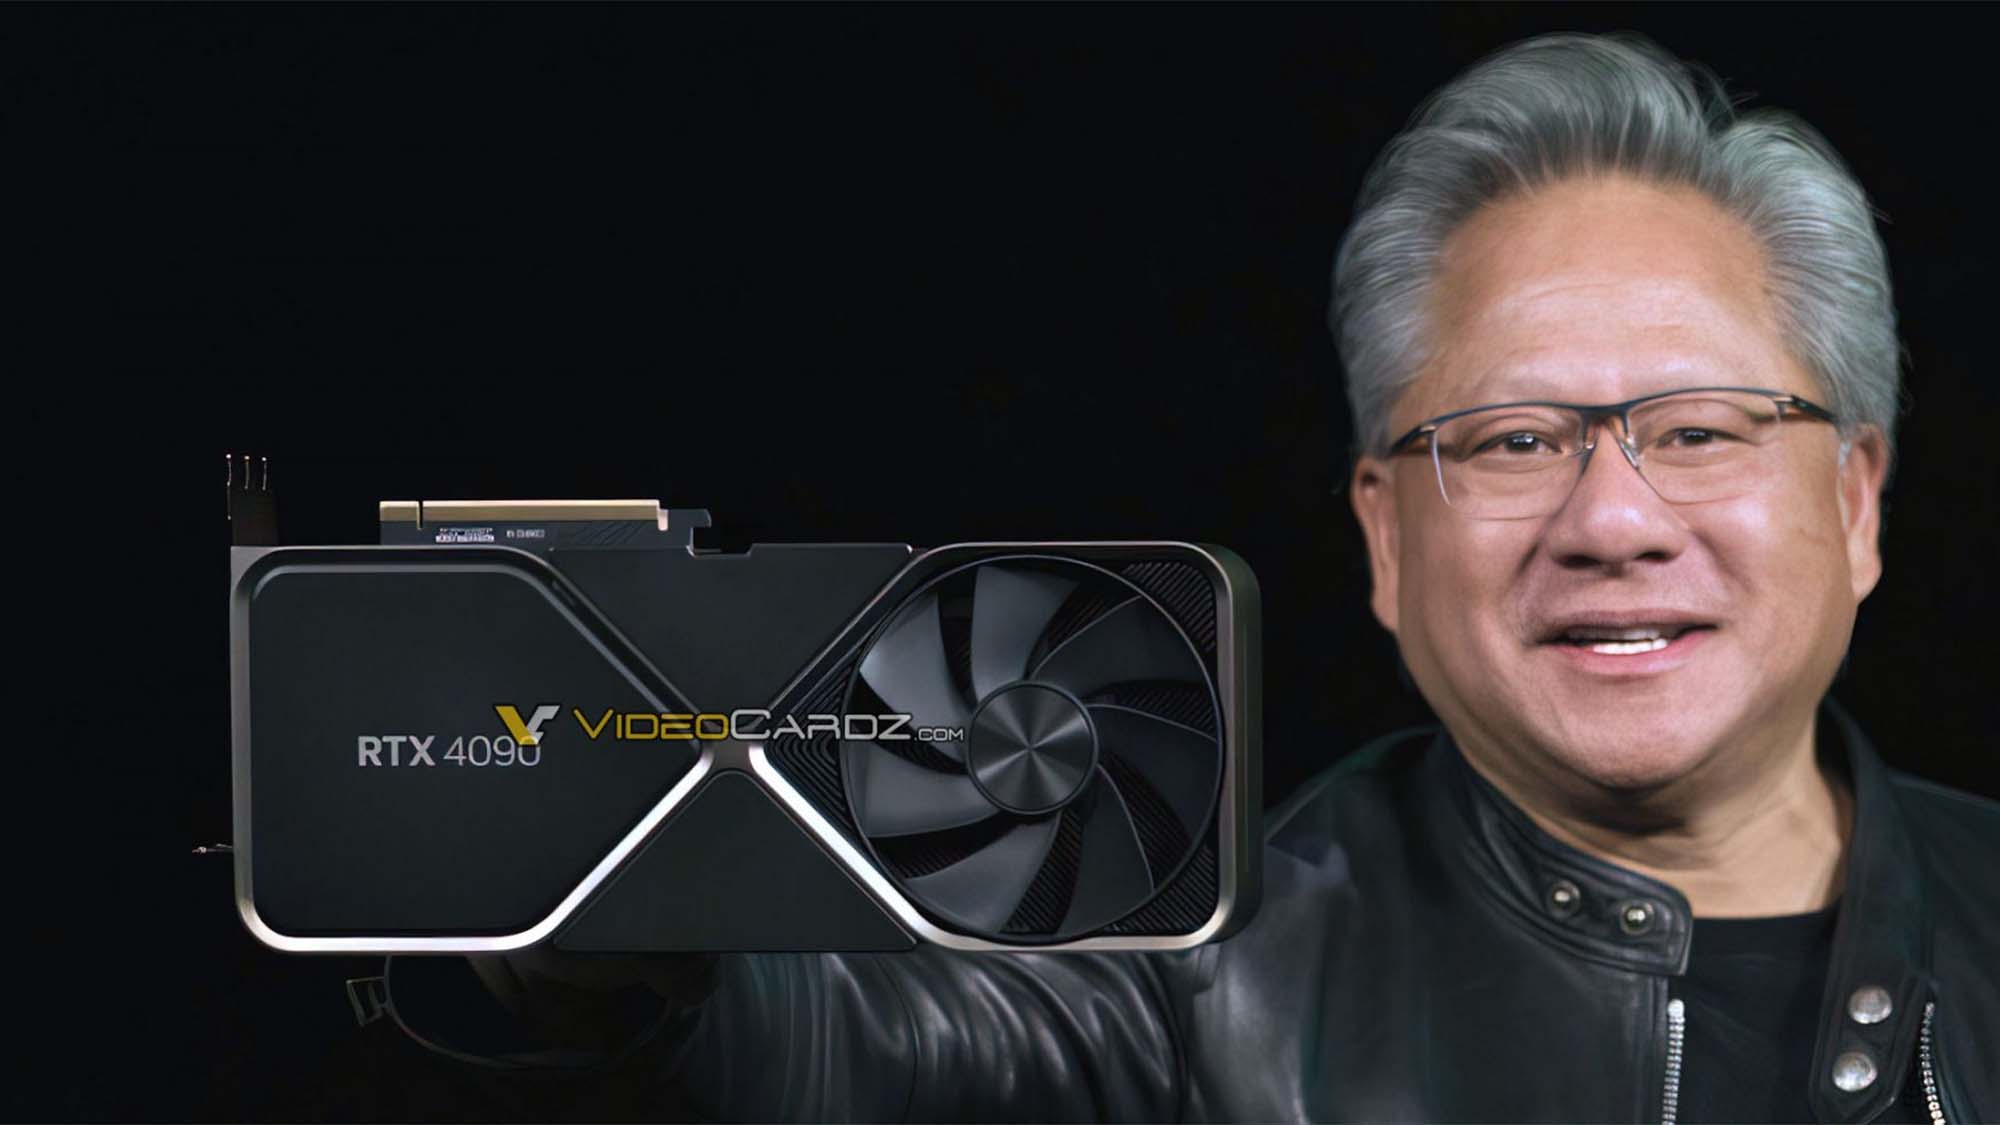 Jensen Huang is said to have an RTX 4090 on a black background